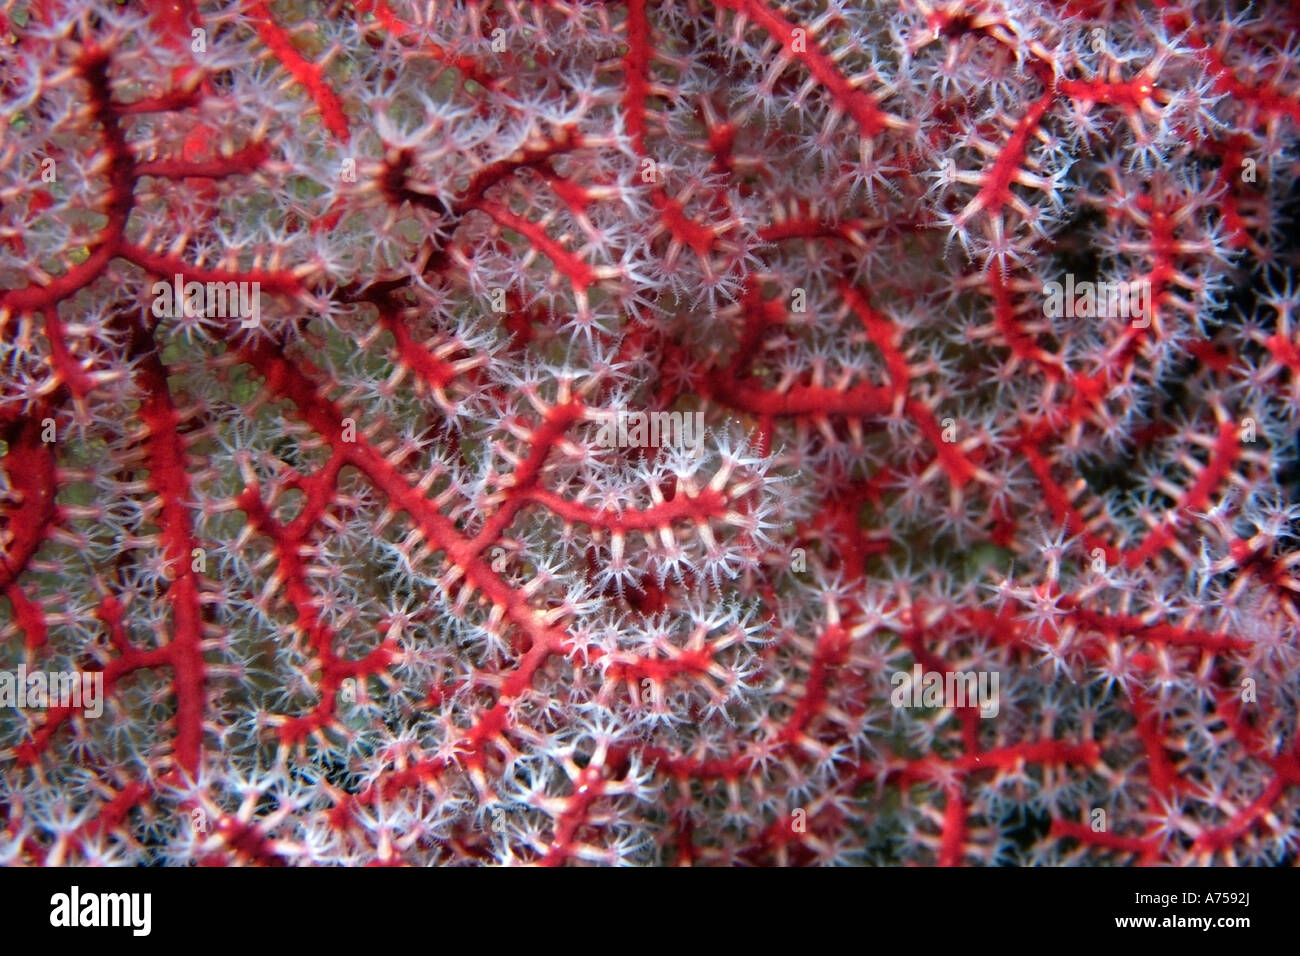 Gorgonian soft coral close up Rongelap Atoll Marshall Islands Micronesia Stock Photo